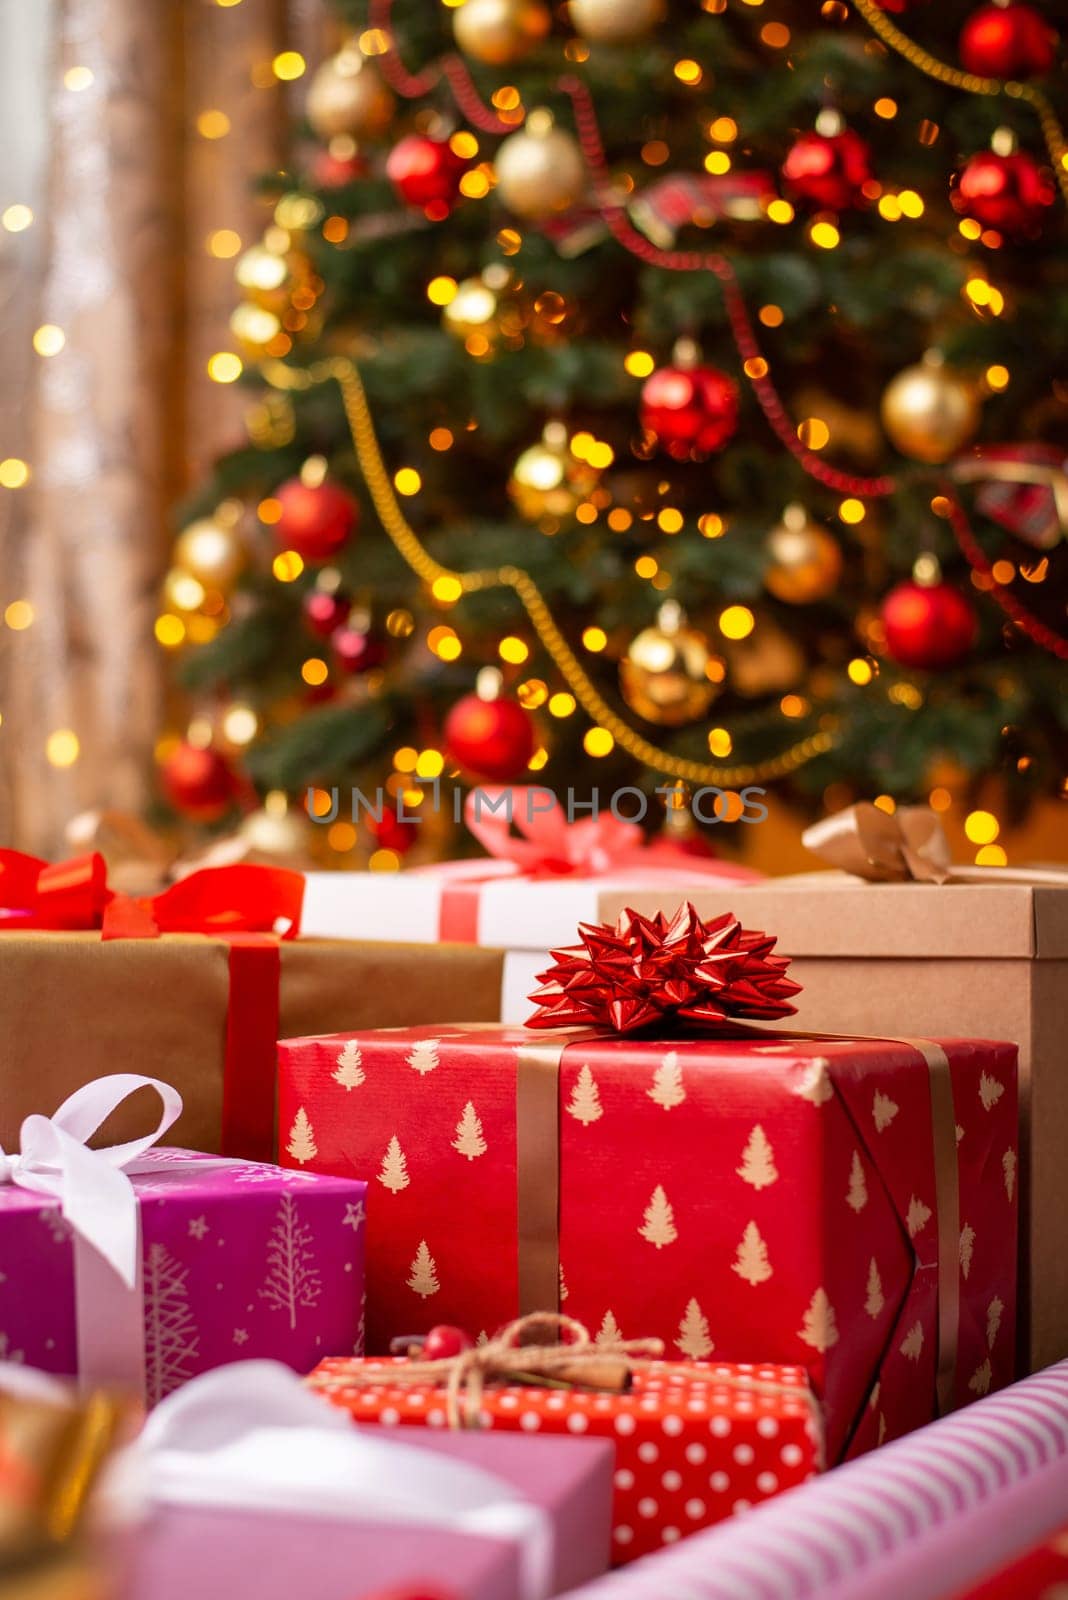 Different beautiful Christmas presents under the Christmas tree